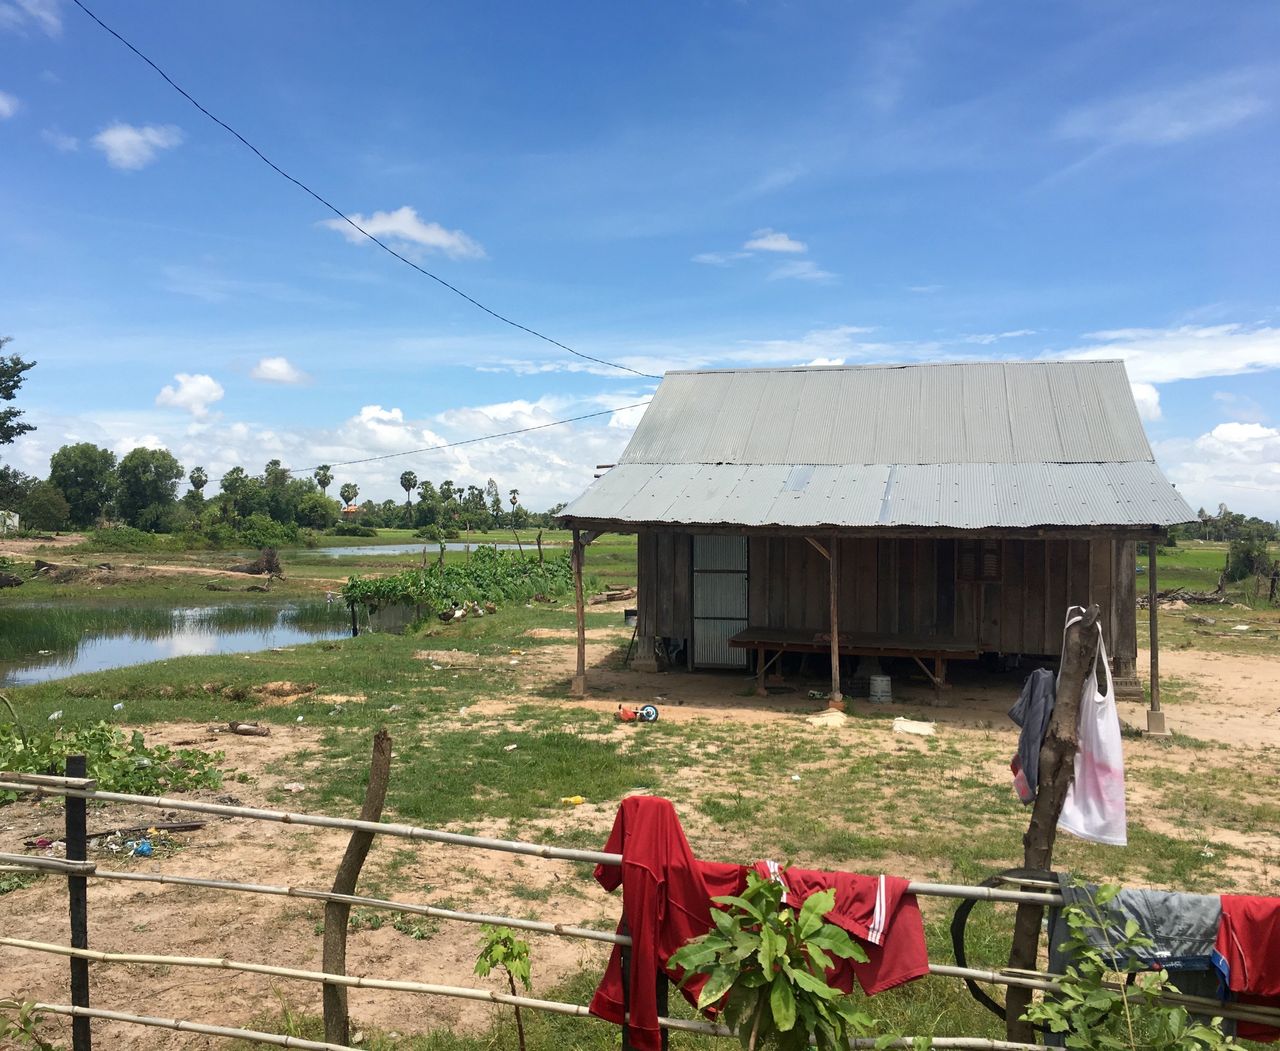 Scenes from a village in Kampong Speu, a town to the west of Cambodia's capital where several Cambodian girls were recruited to go to China.